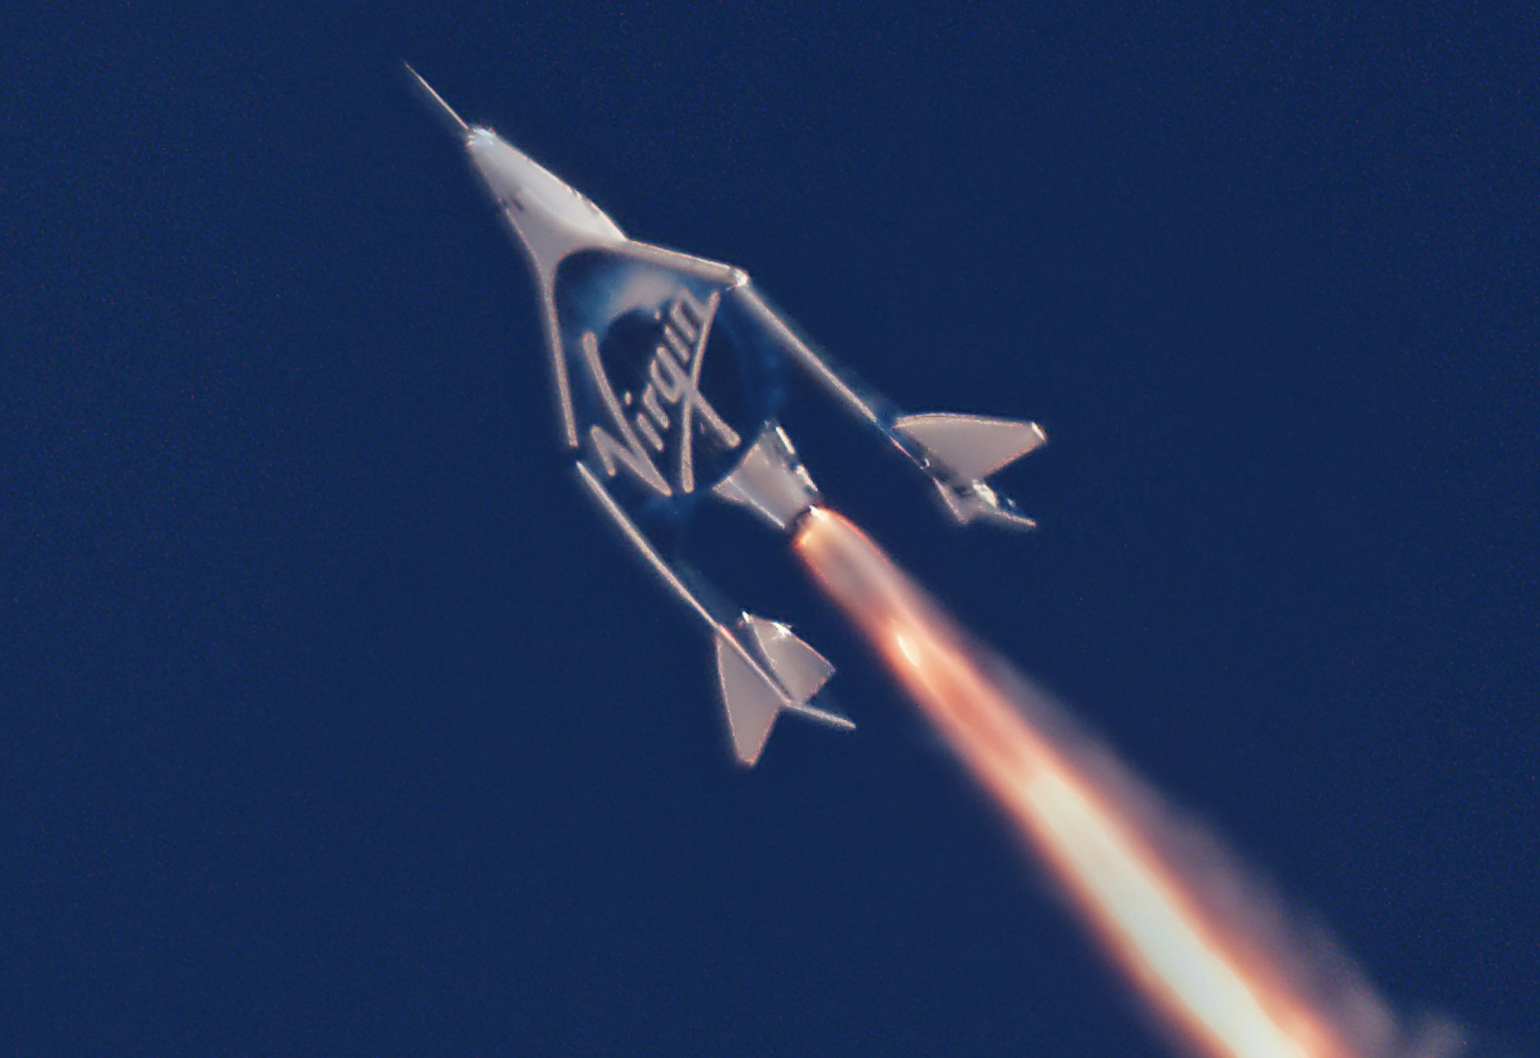 the race is on to be the first to commercialise space travel